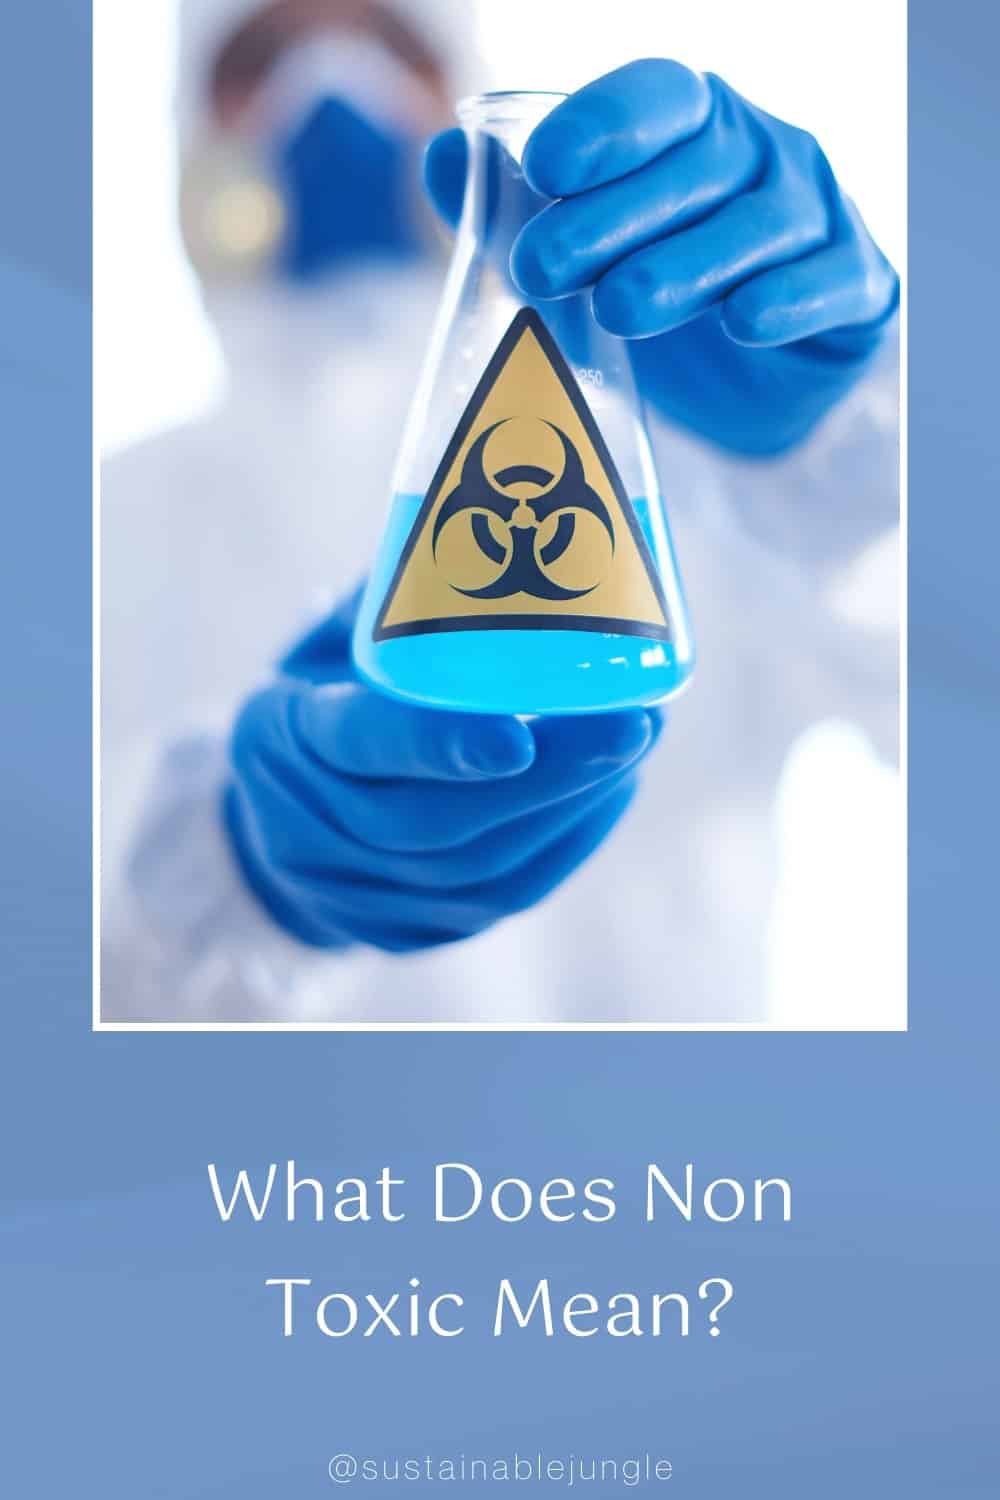 What Does Non Toxic Mean? #whatdoesnontoxicmean? #whatdoesitmeanwhensomethingisnontoxic? #whatisnontoxic? #nontoxicvsorganic #whatmakesaproductnontoxic? #definenontoxic #nontoxicdefinition #sustainablejungle Image by shironosov via Getty Images on Canva Pro